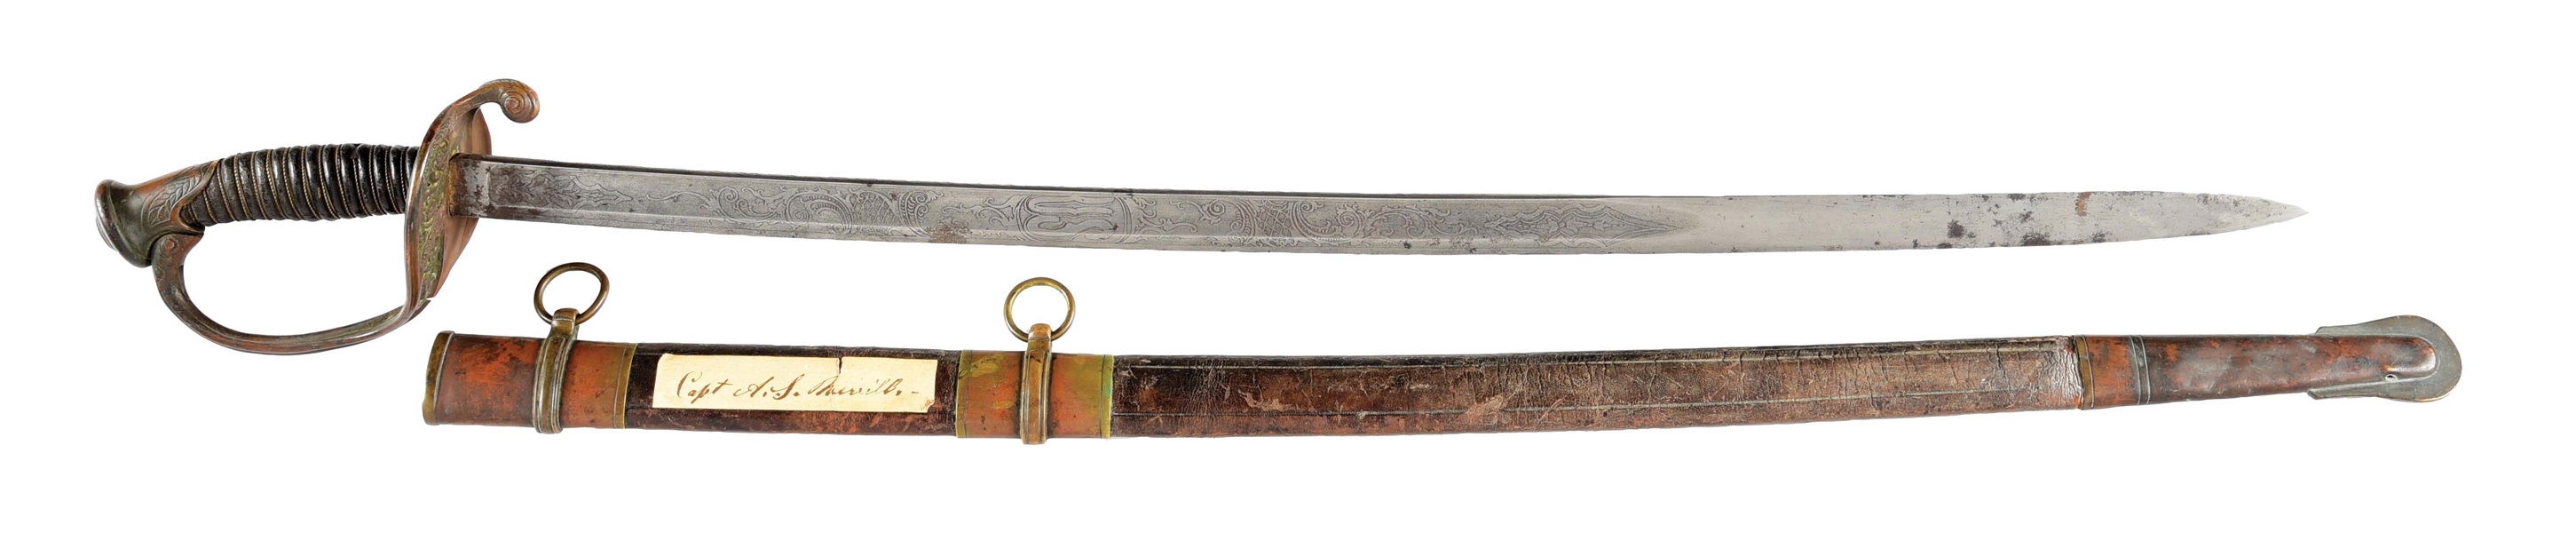 IDENTIFIED THIRD MAINE OFFICERS SWORD: DIED OF WOUNDS AT SPOTTSYLVANIA. 